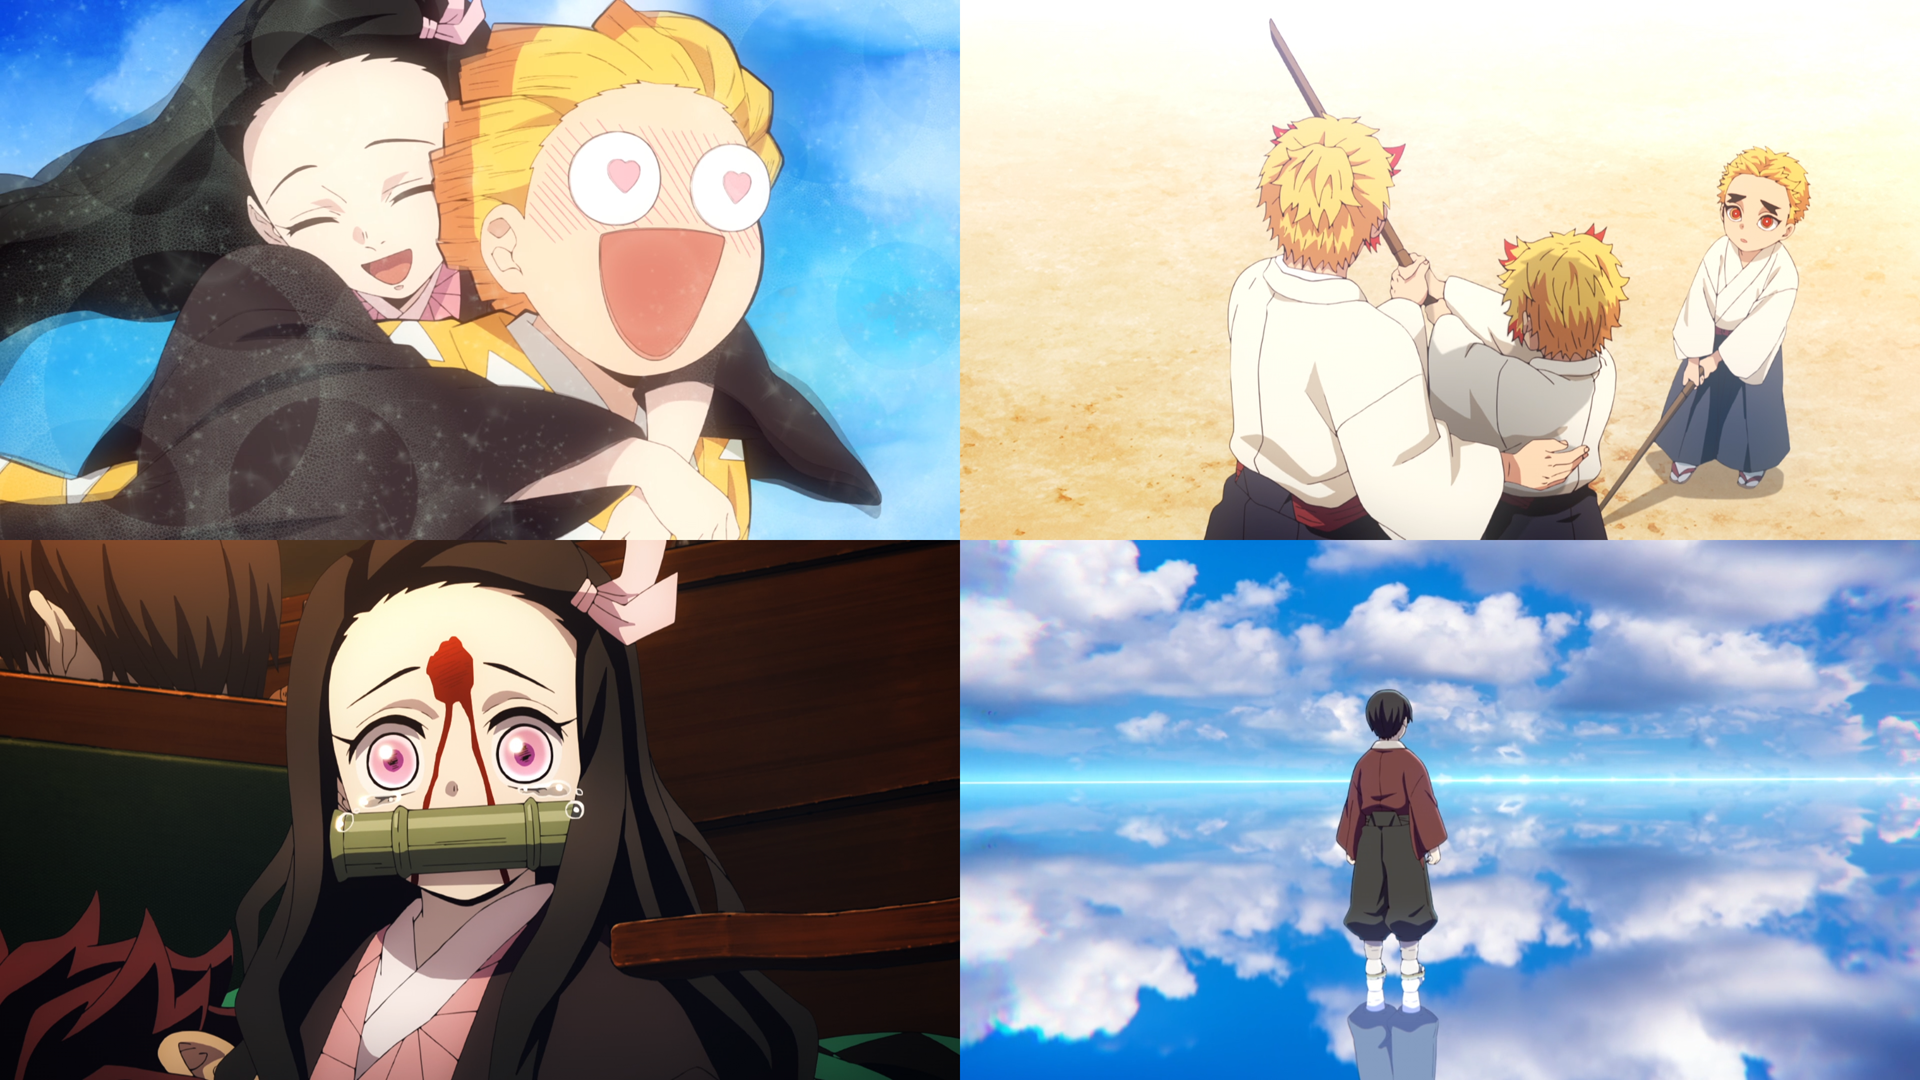 Enter Into The Demon World With The Demon Slayer Anime - ShonenRoad